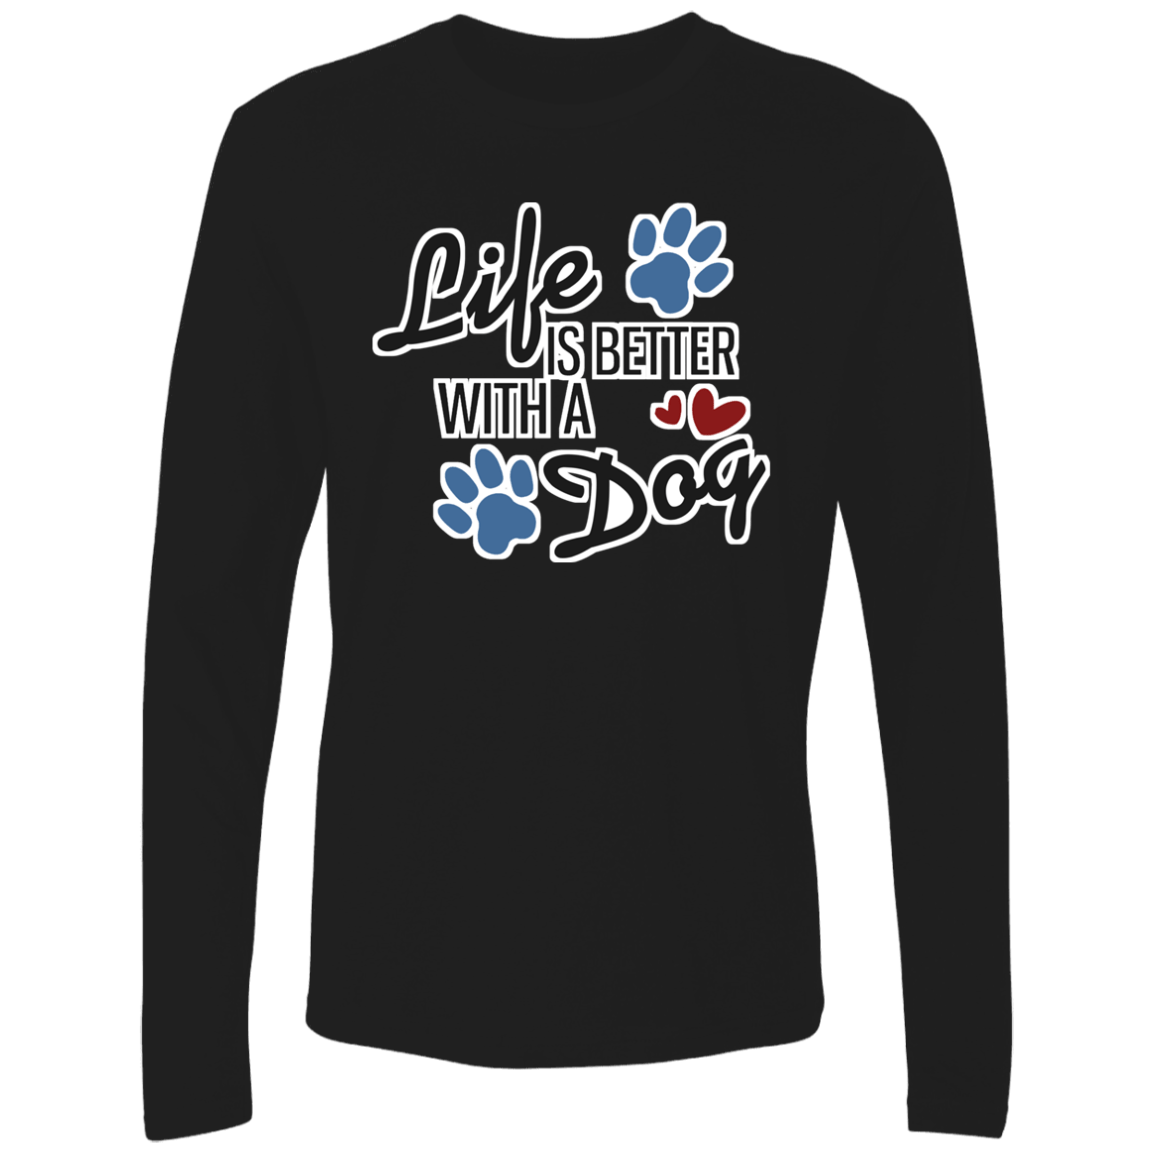 Life is Better with a Dog - Long Sleeve T Shirt.